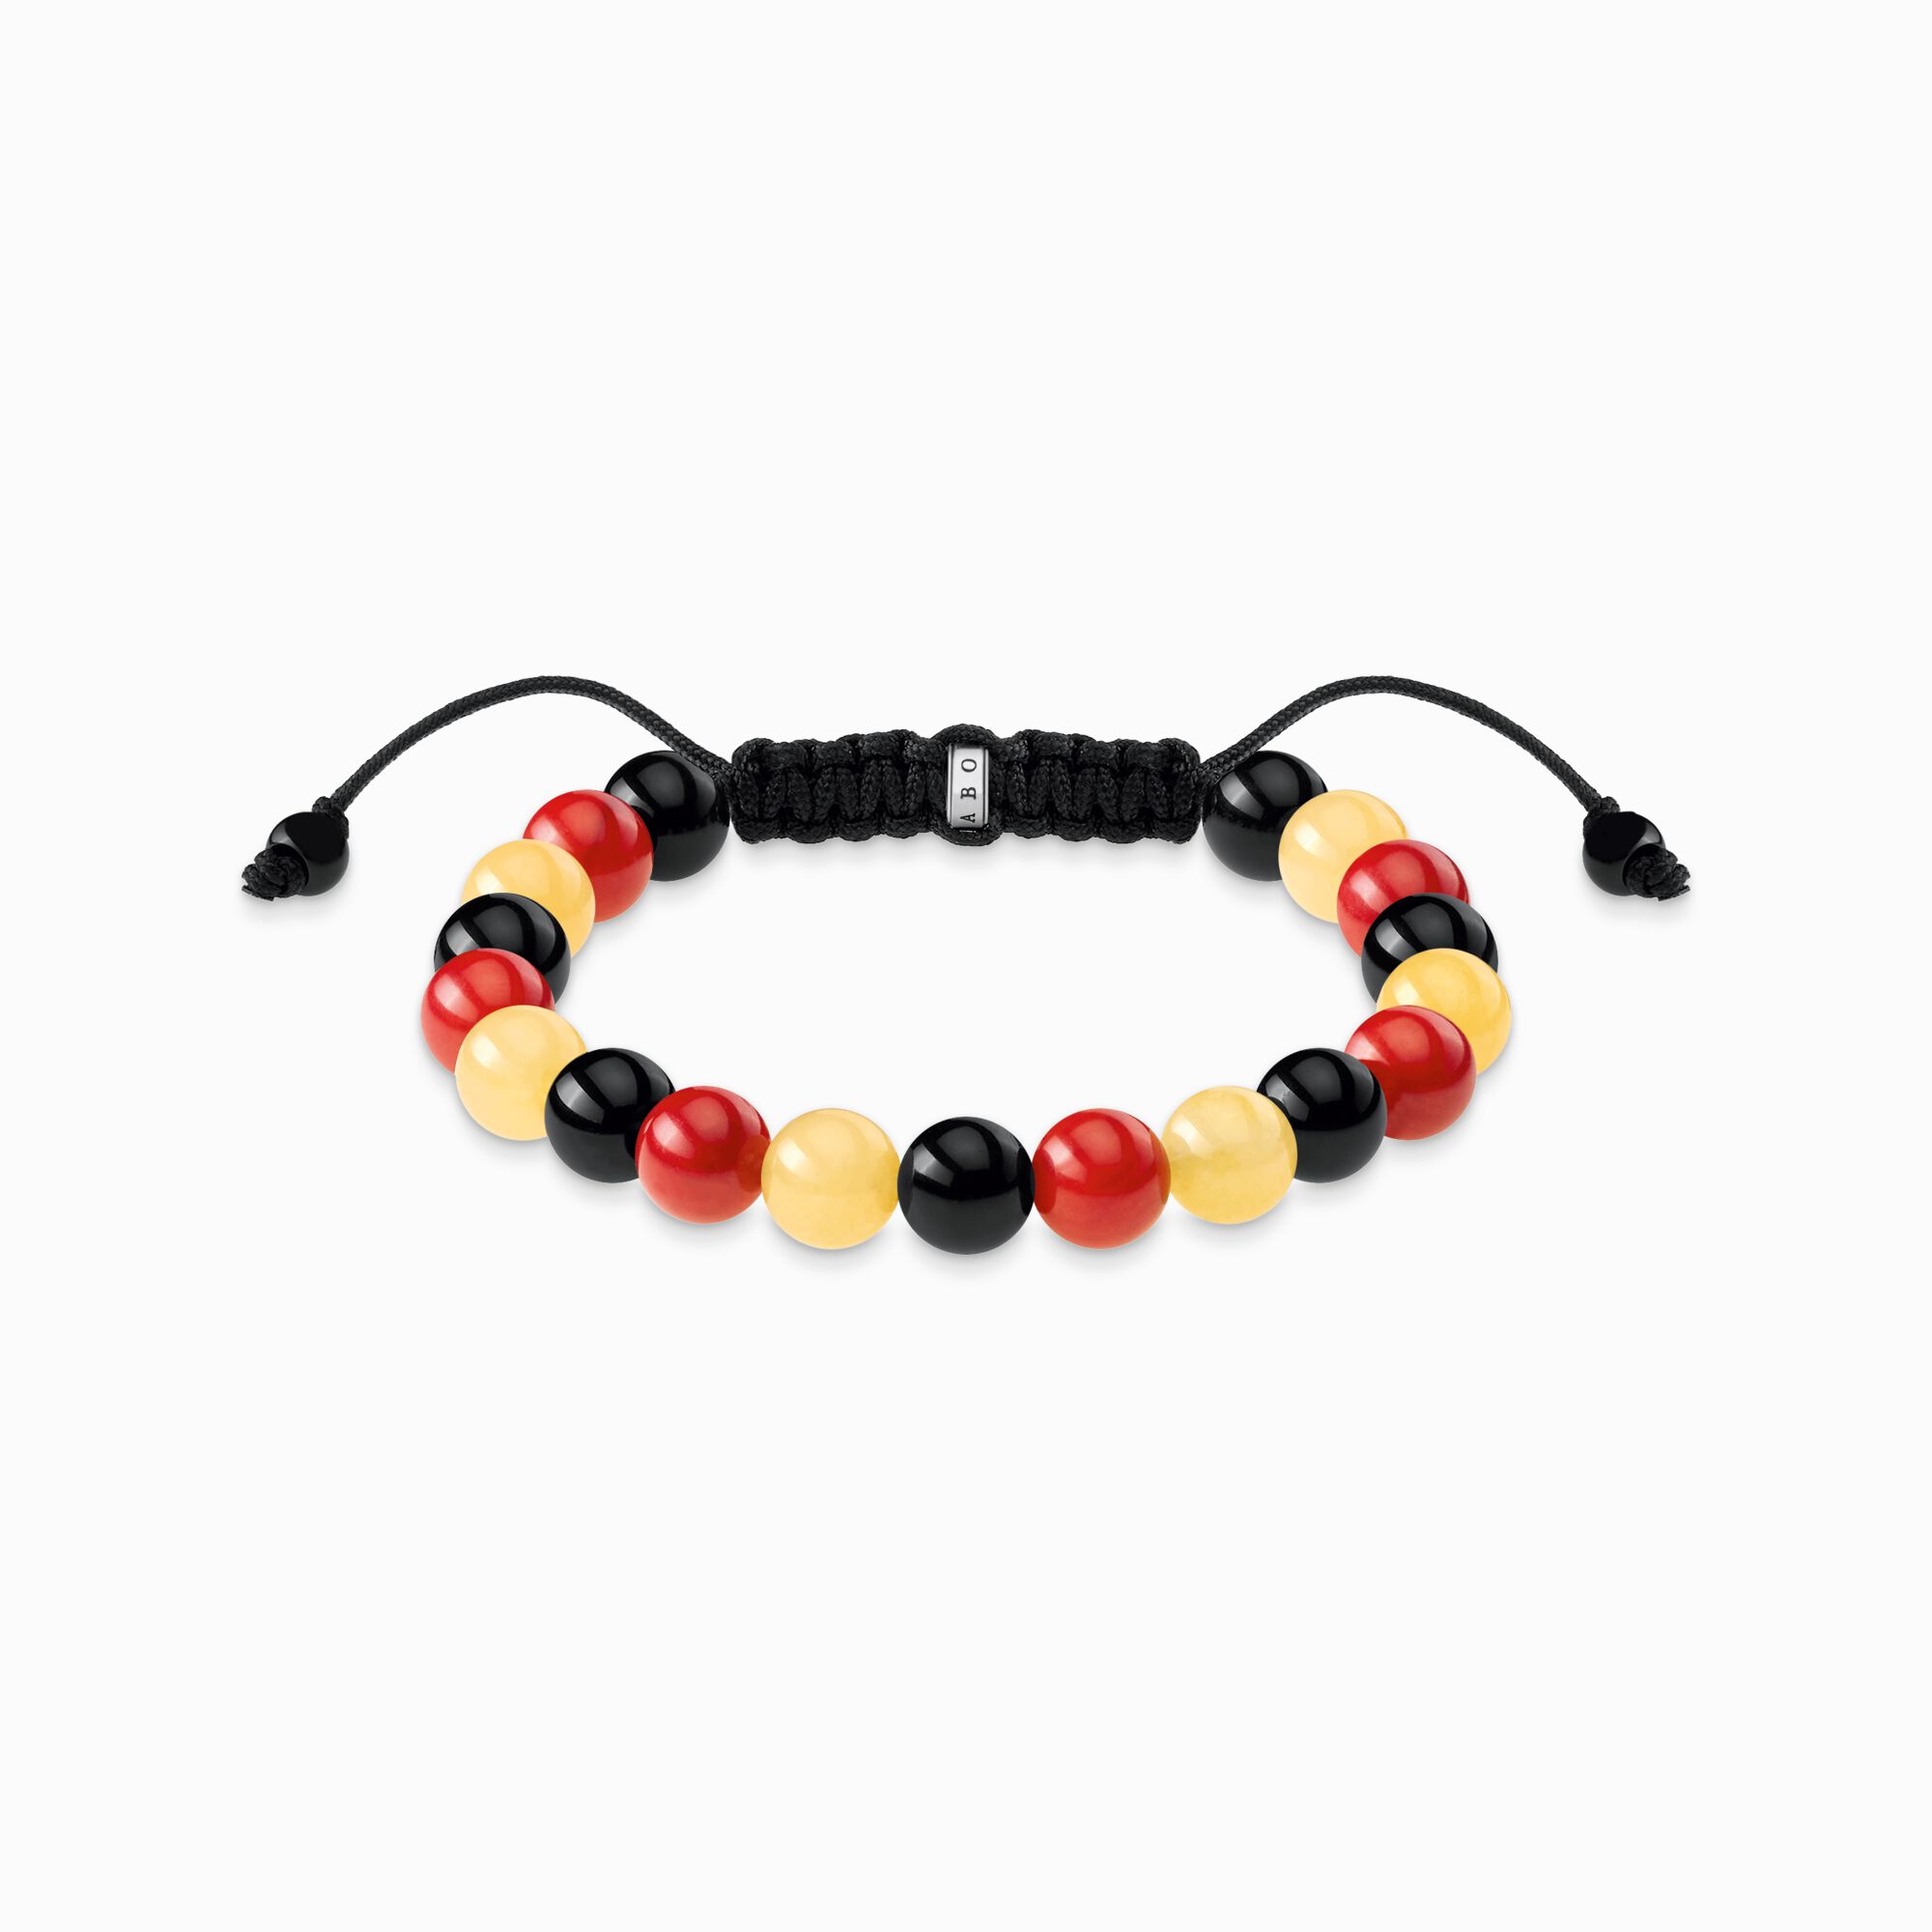 Bracelet Germany from the  collection in the THOMAS SABO online store